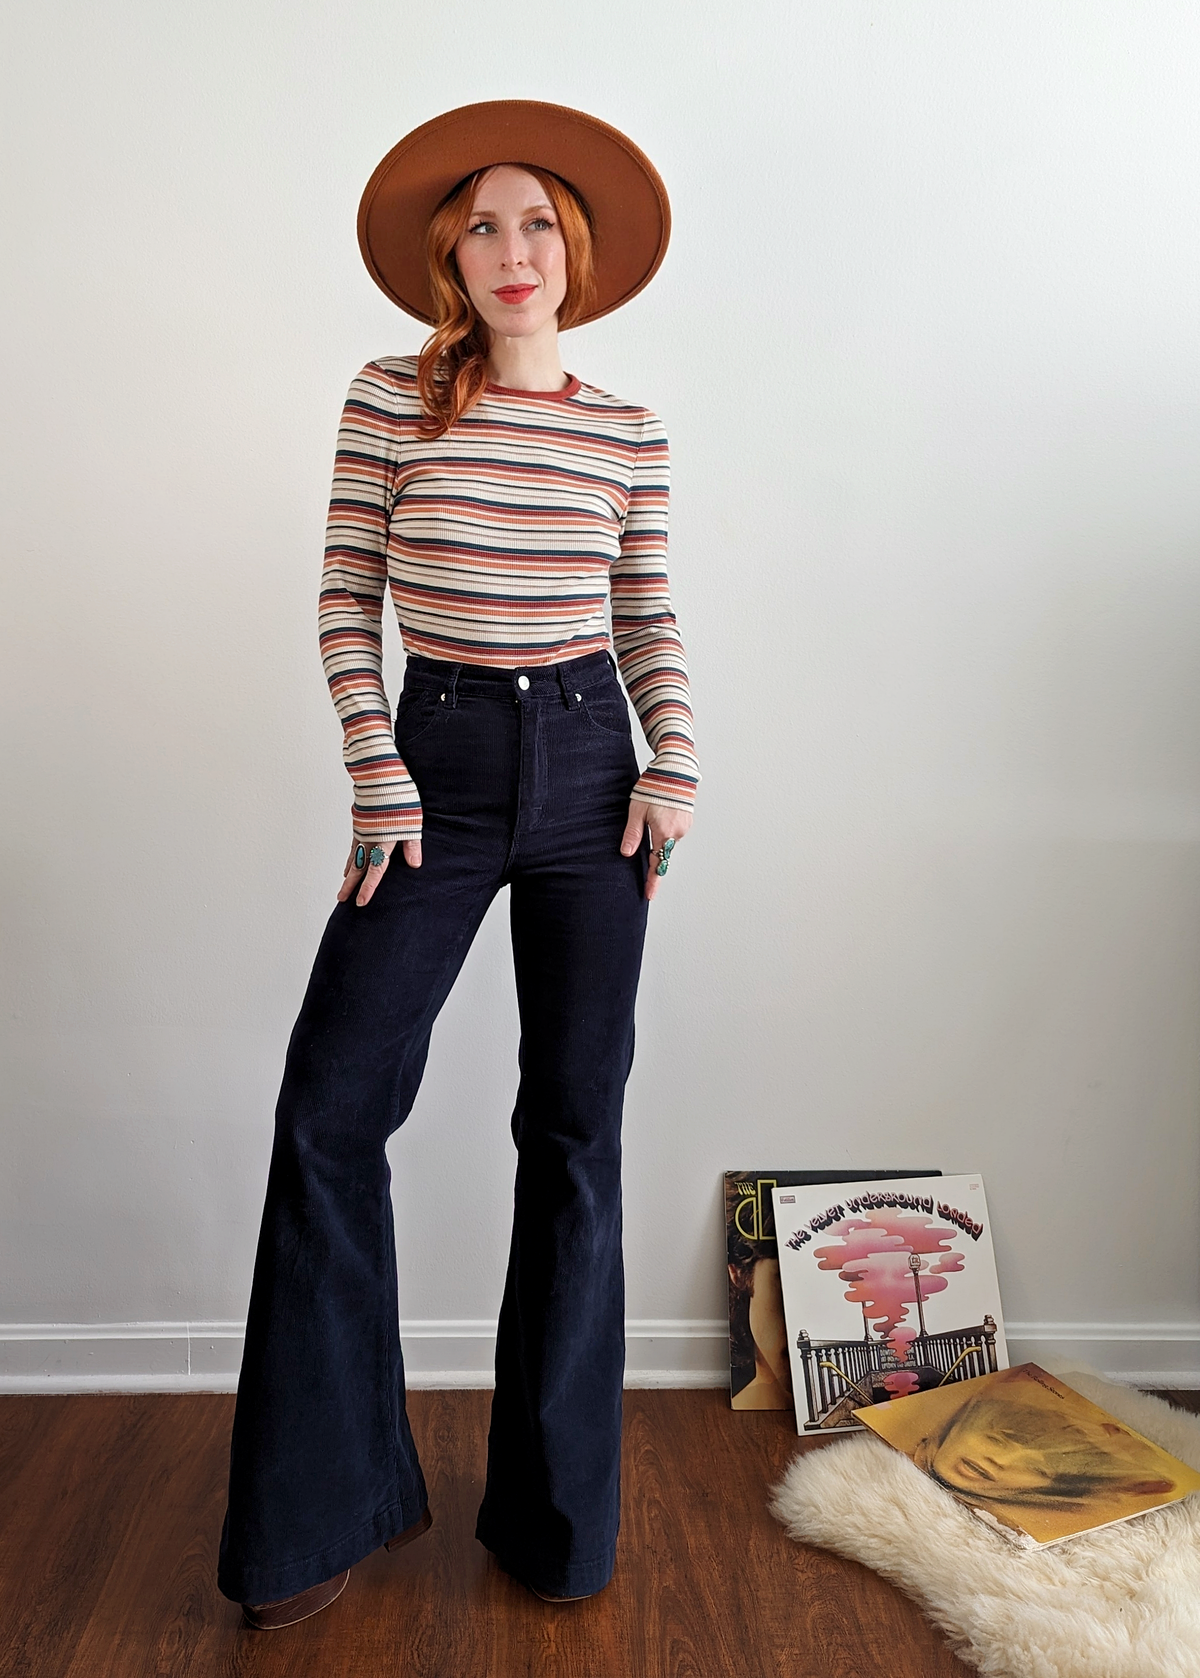 Rolla's Jeans Navy Corduroy Eastcoast Flare: Retro 70s inspired bell bottoms with a high rise waist and velvety soft thin wale corduroy.  